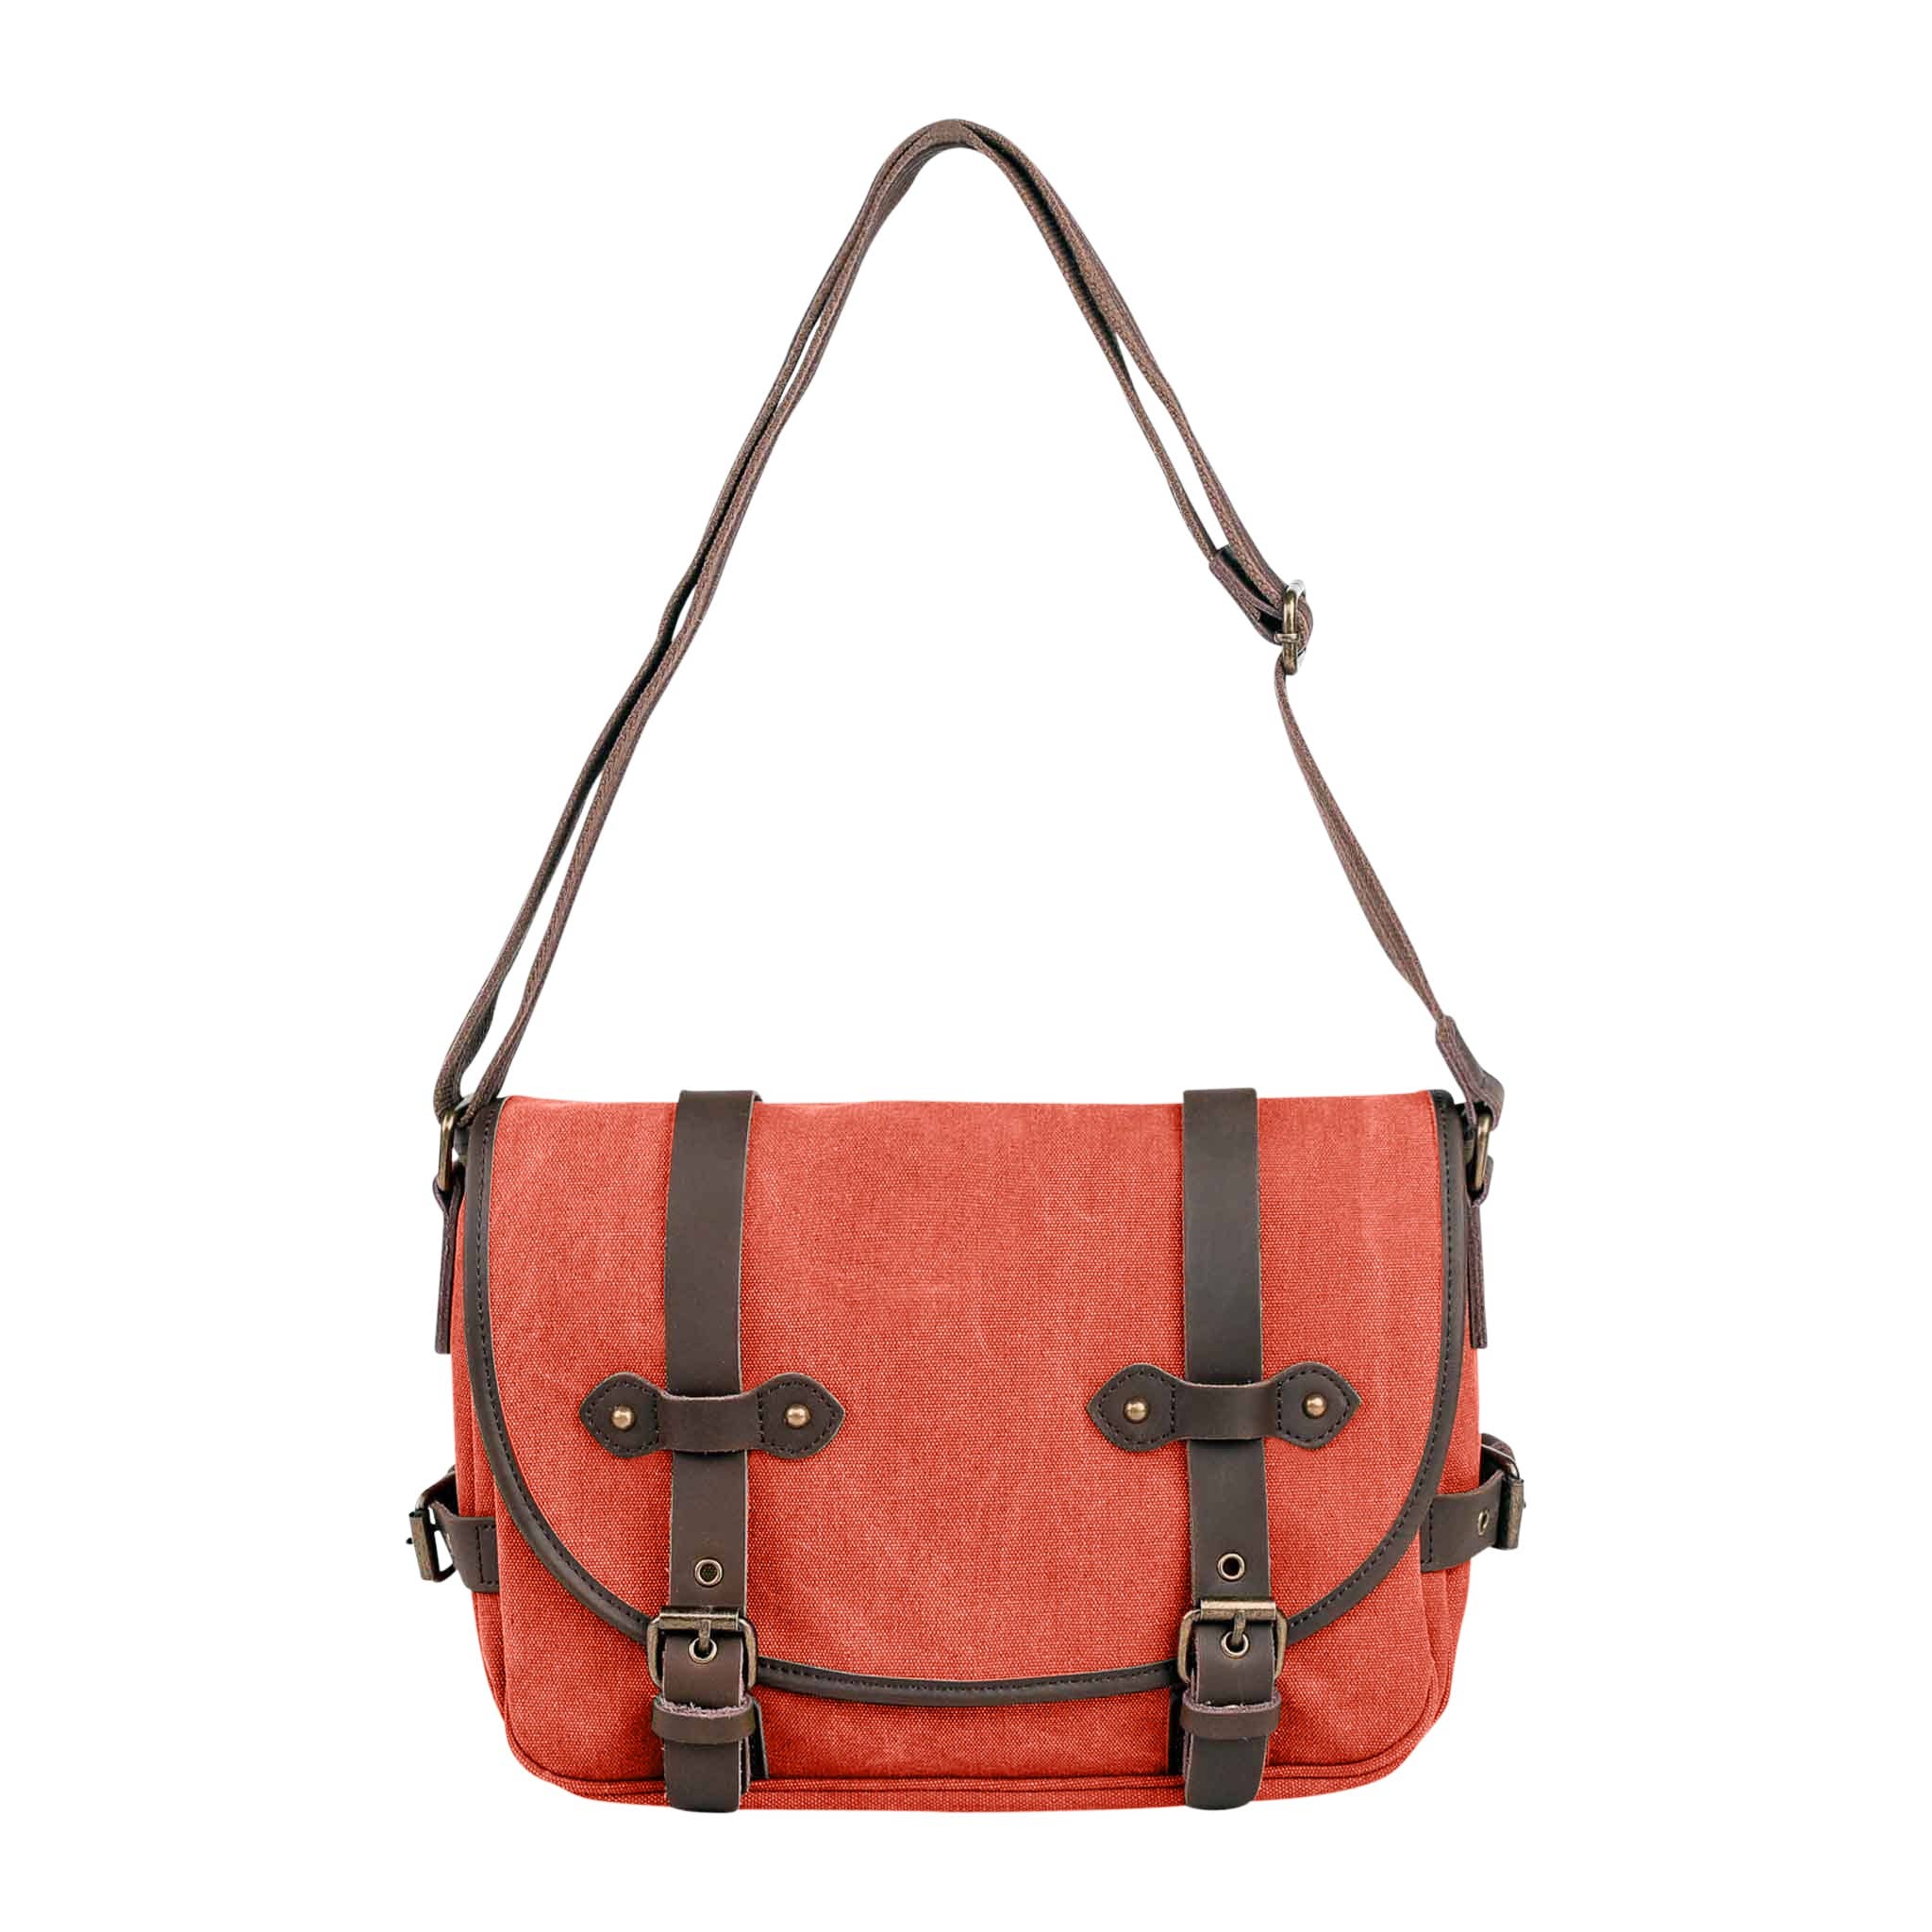 coral colored messenger type bag